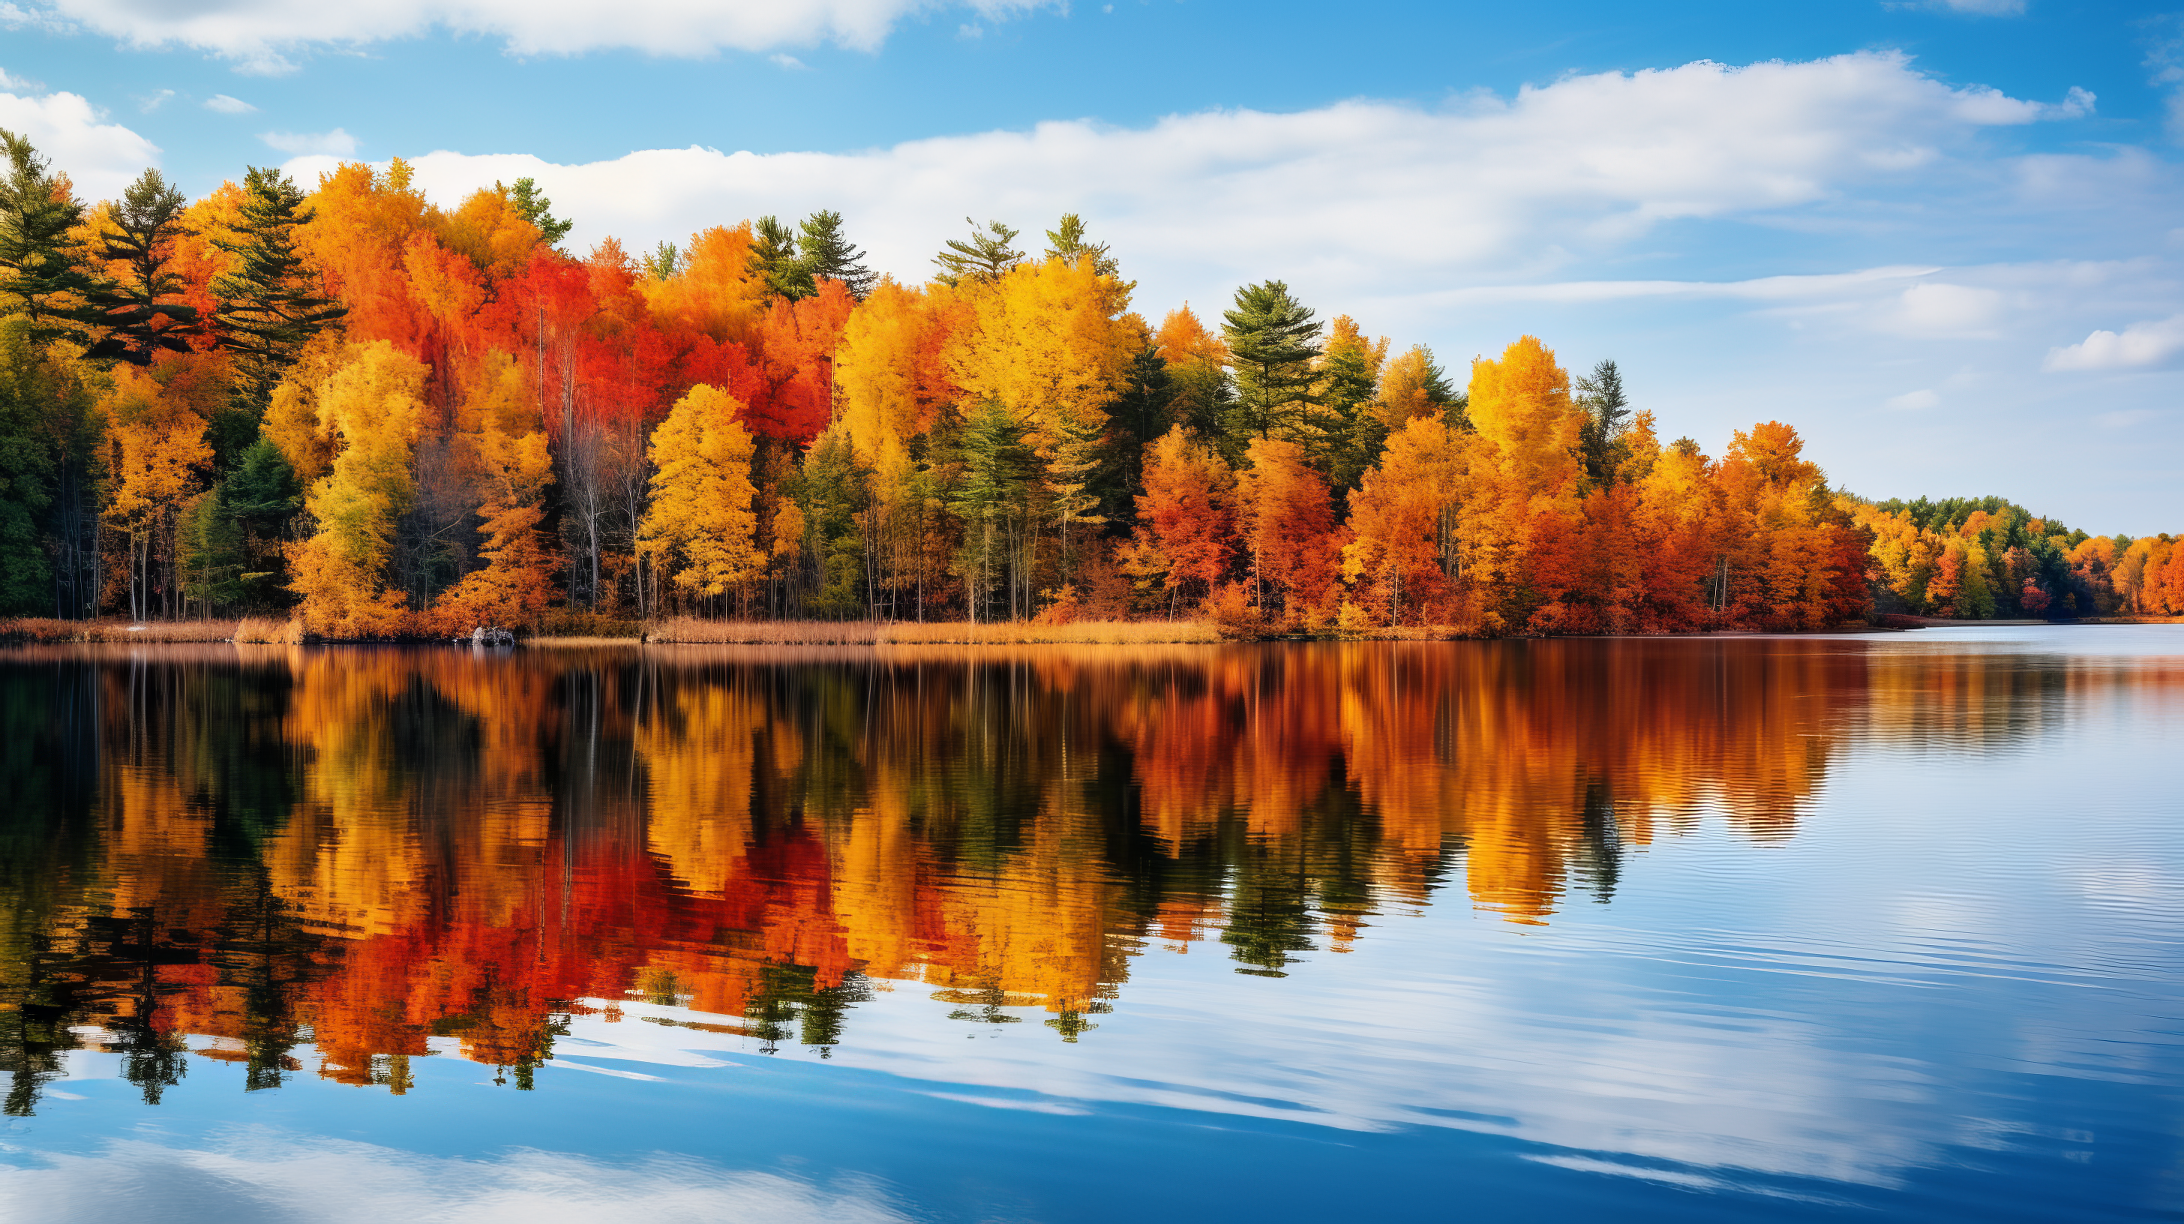 Colorful Fall Landscape Surrounded by Lake and Trees Wallpaper by patrika